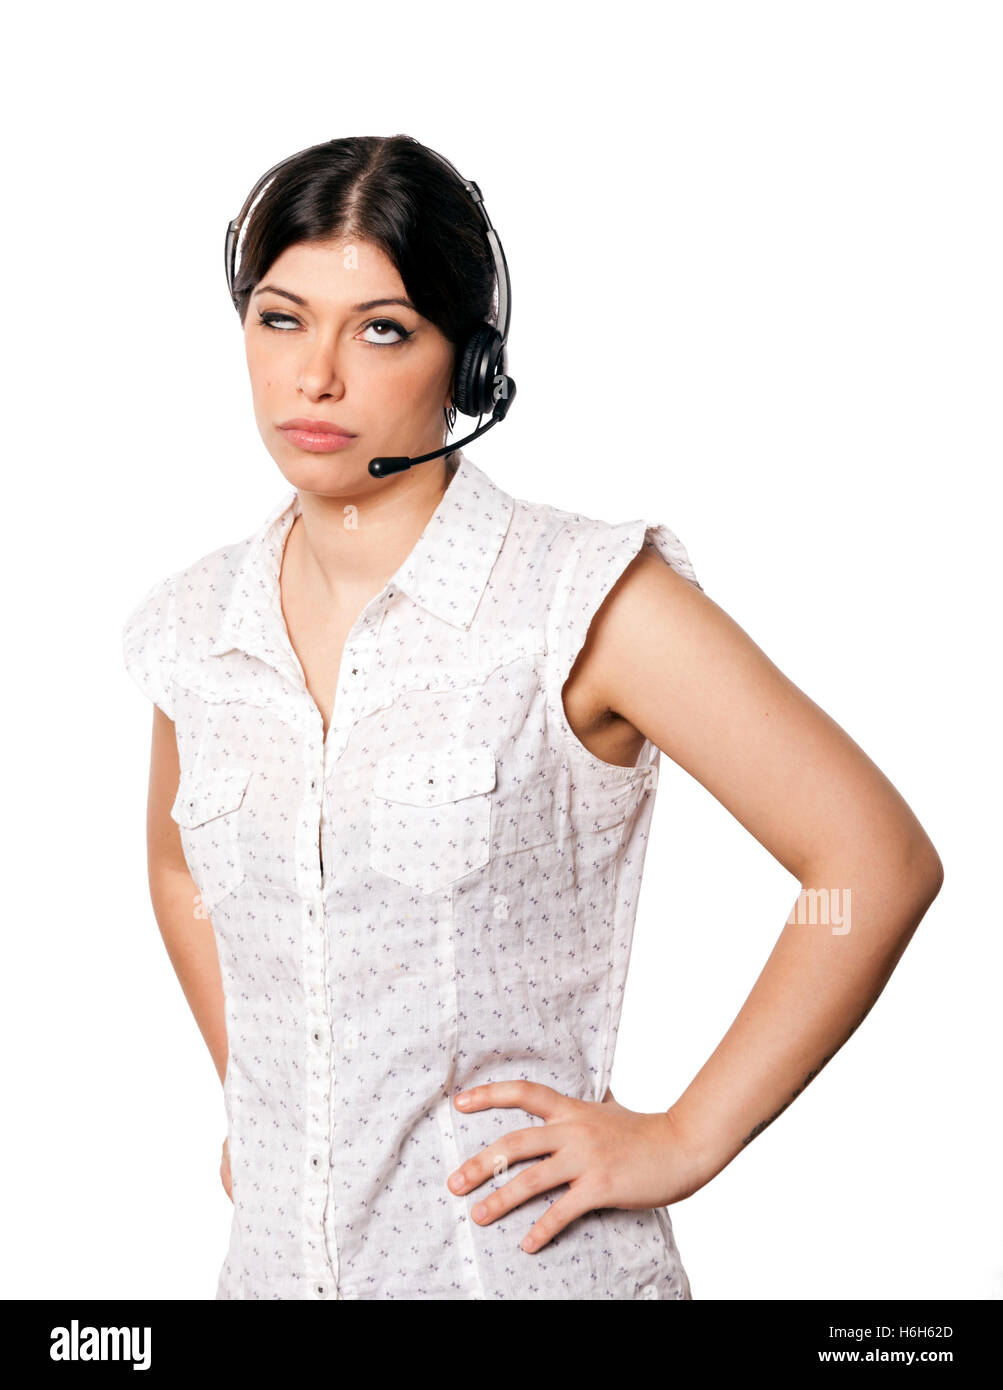 A bautiful young adult Caucasian woman wearing a headset and rolling her eyes up with a displeased expression. Isolated on white Stock Photo